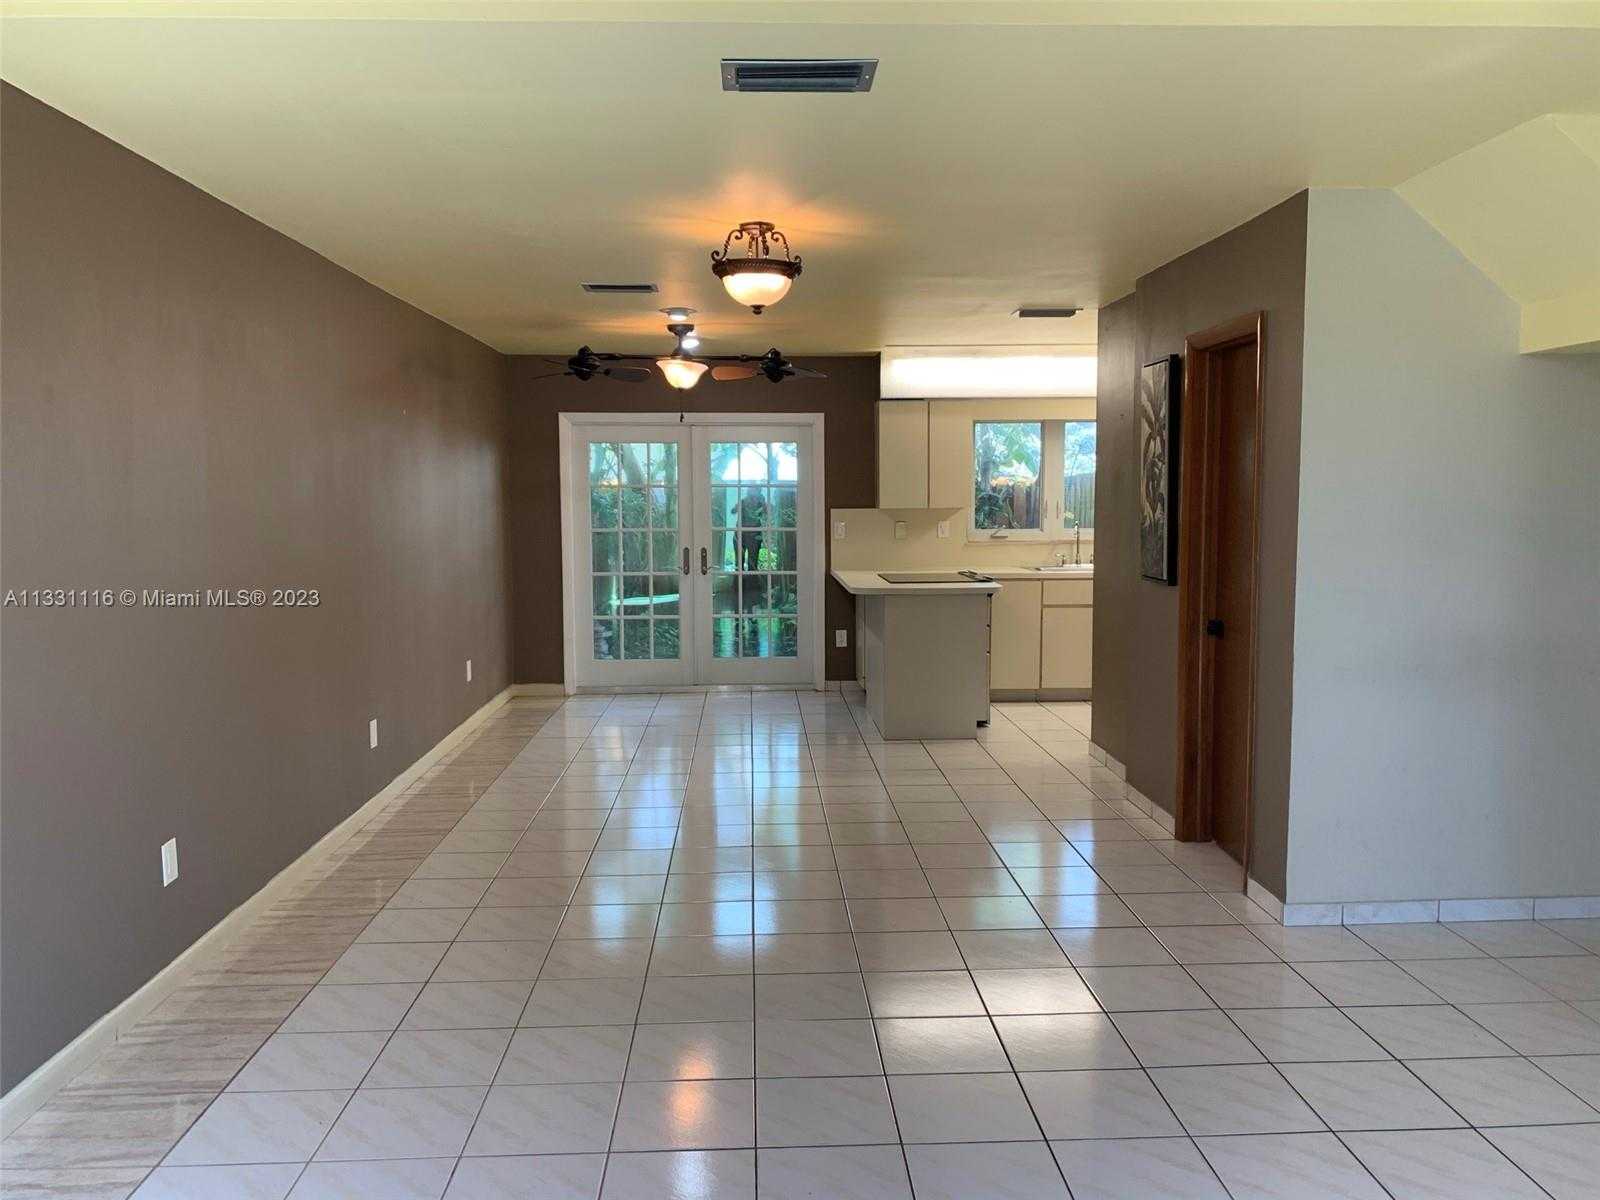 House in Hollywood, Florida 11622423